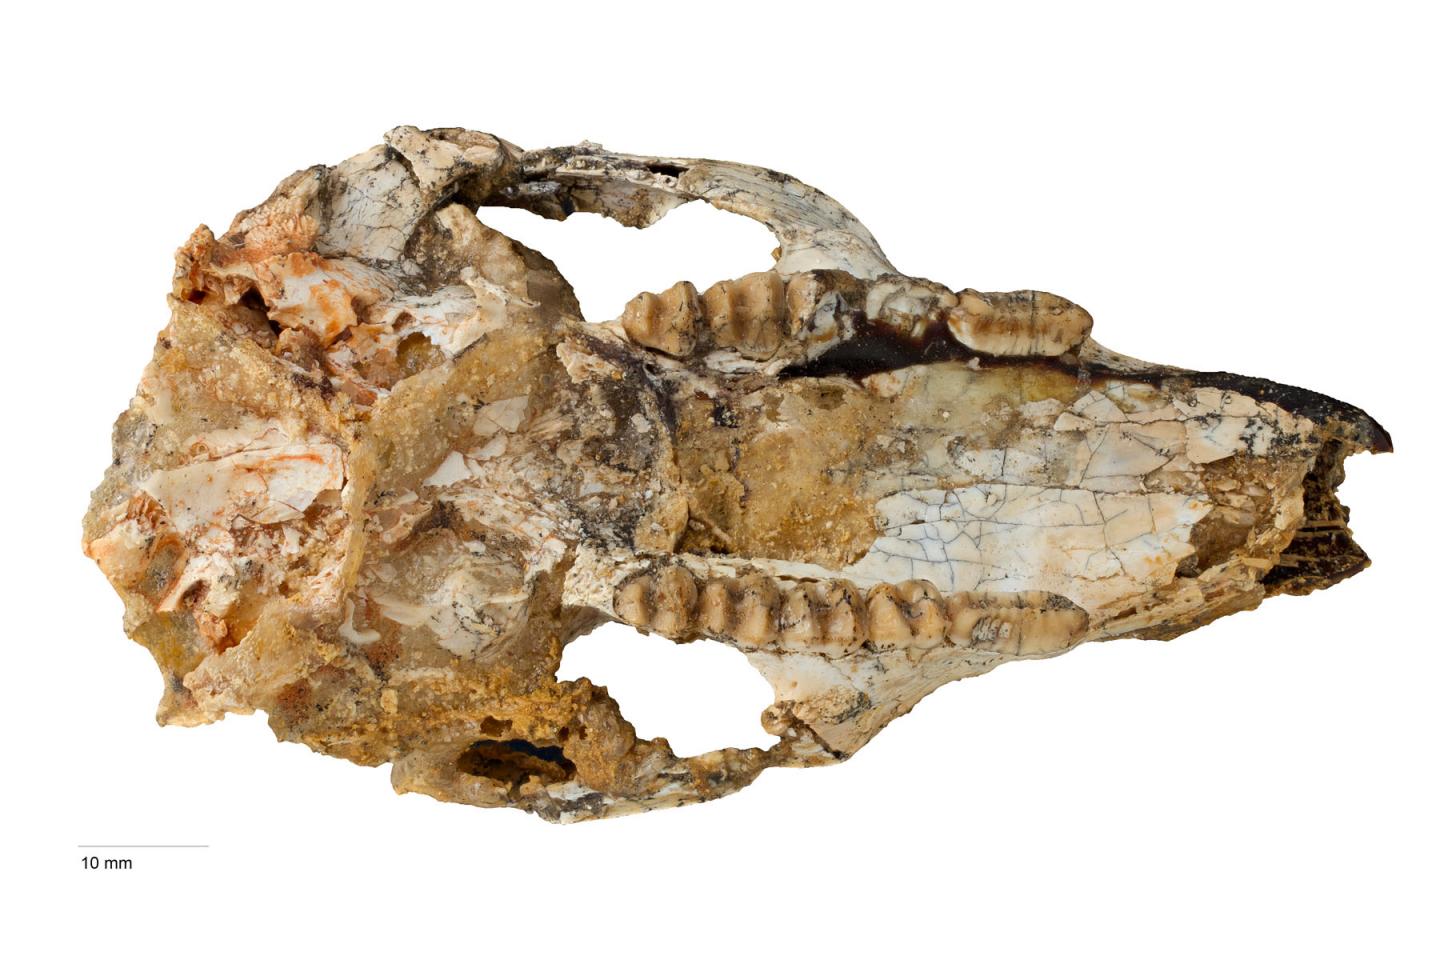 New Species Couldn't Hop, but Outlived its Fanged Kangaroo Contemporaries